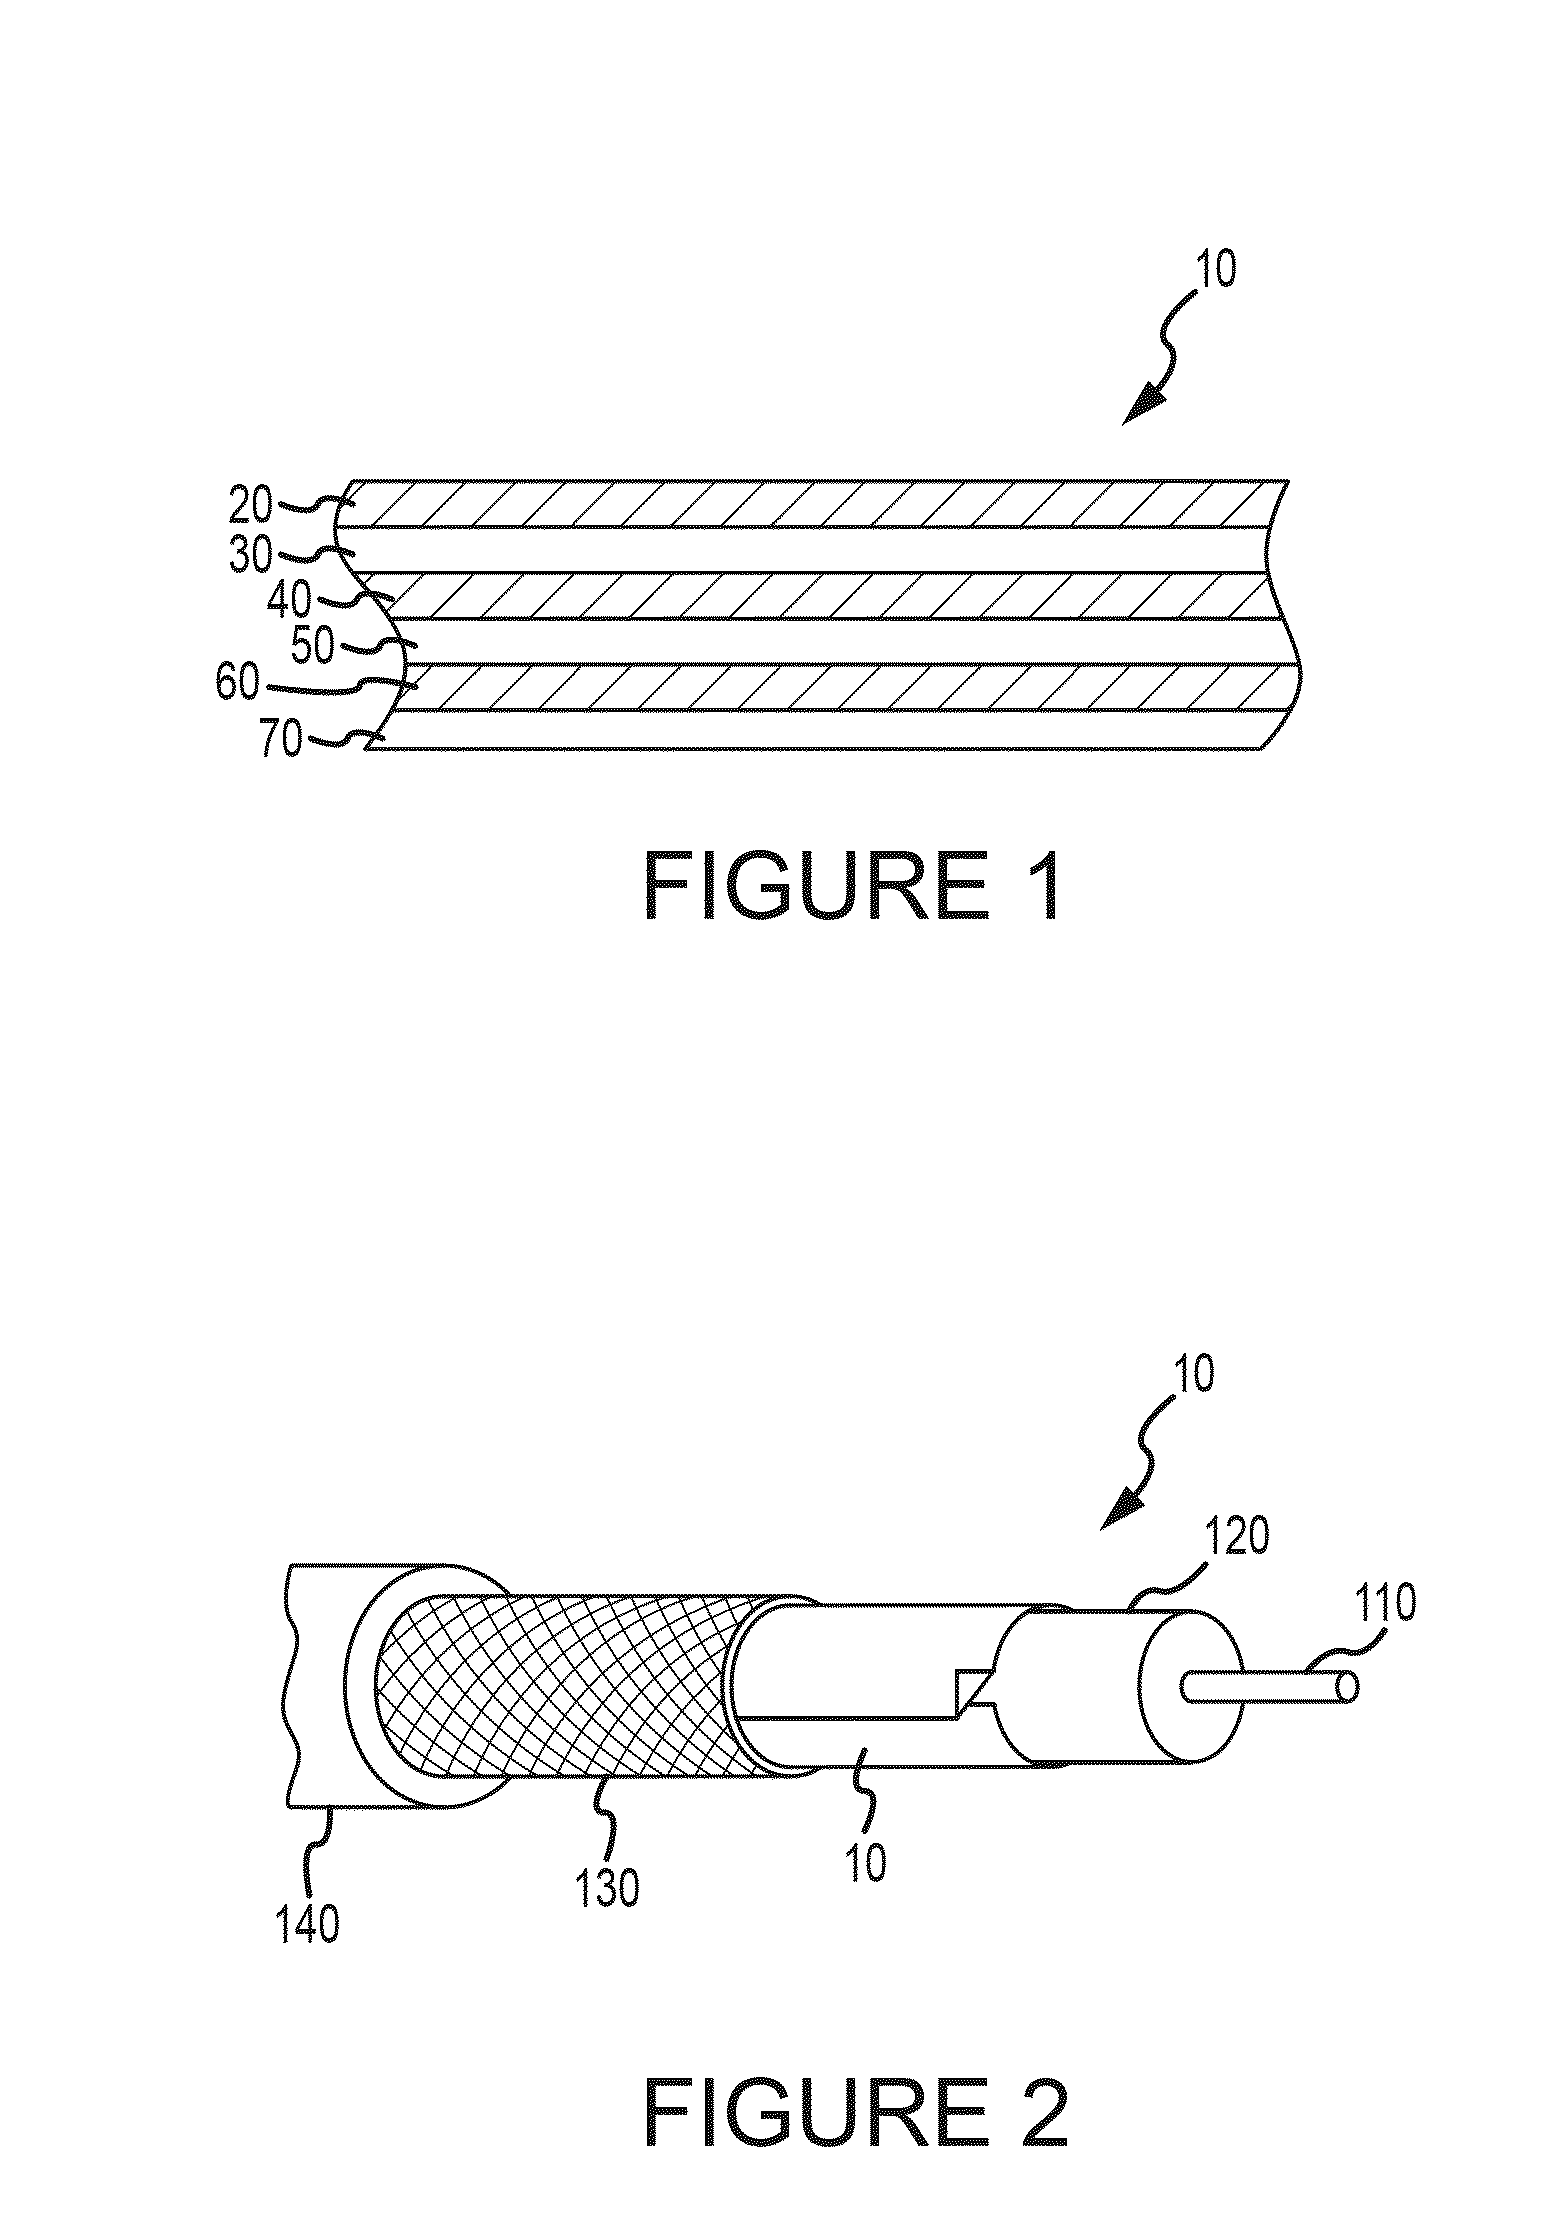 Shielding tape with multiple foil layers